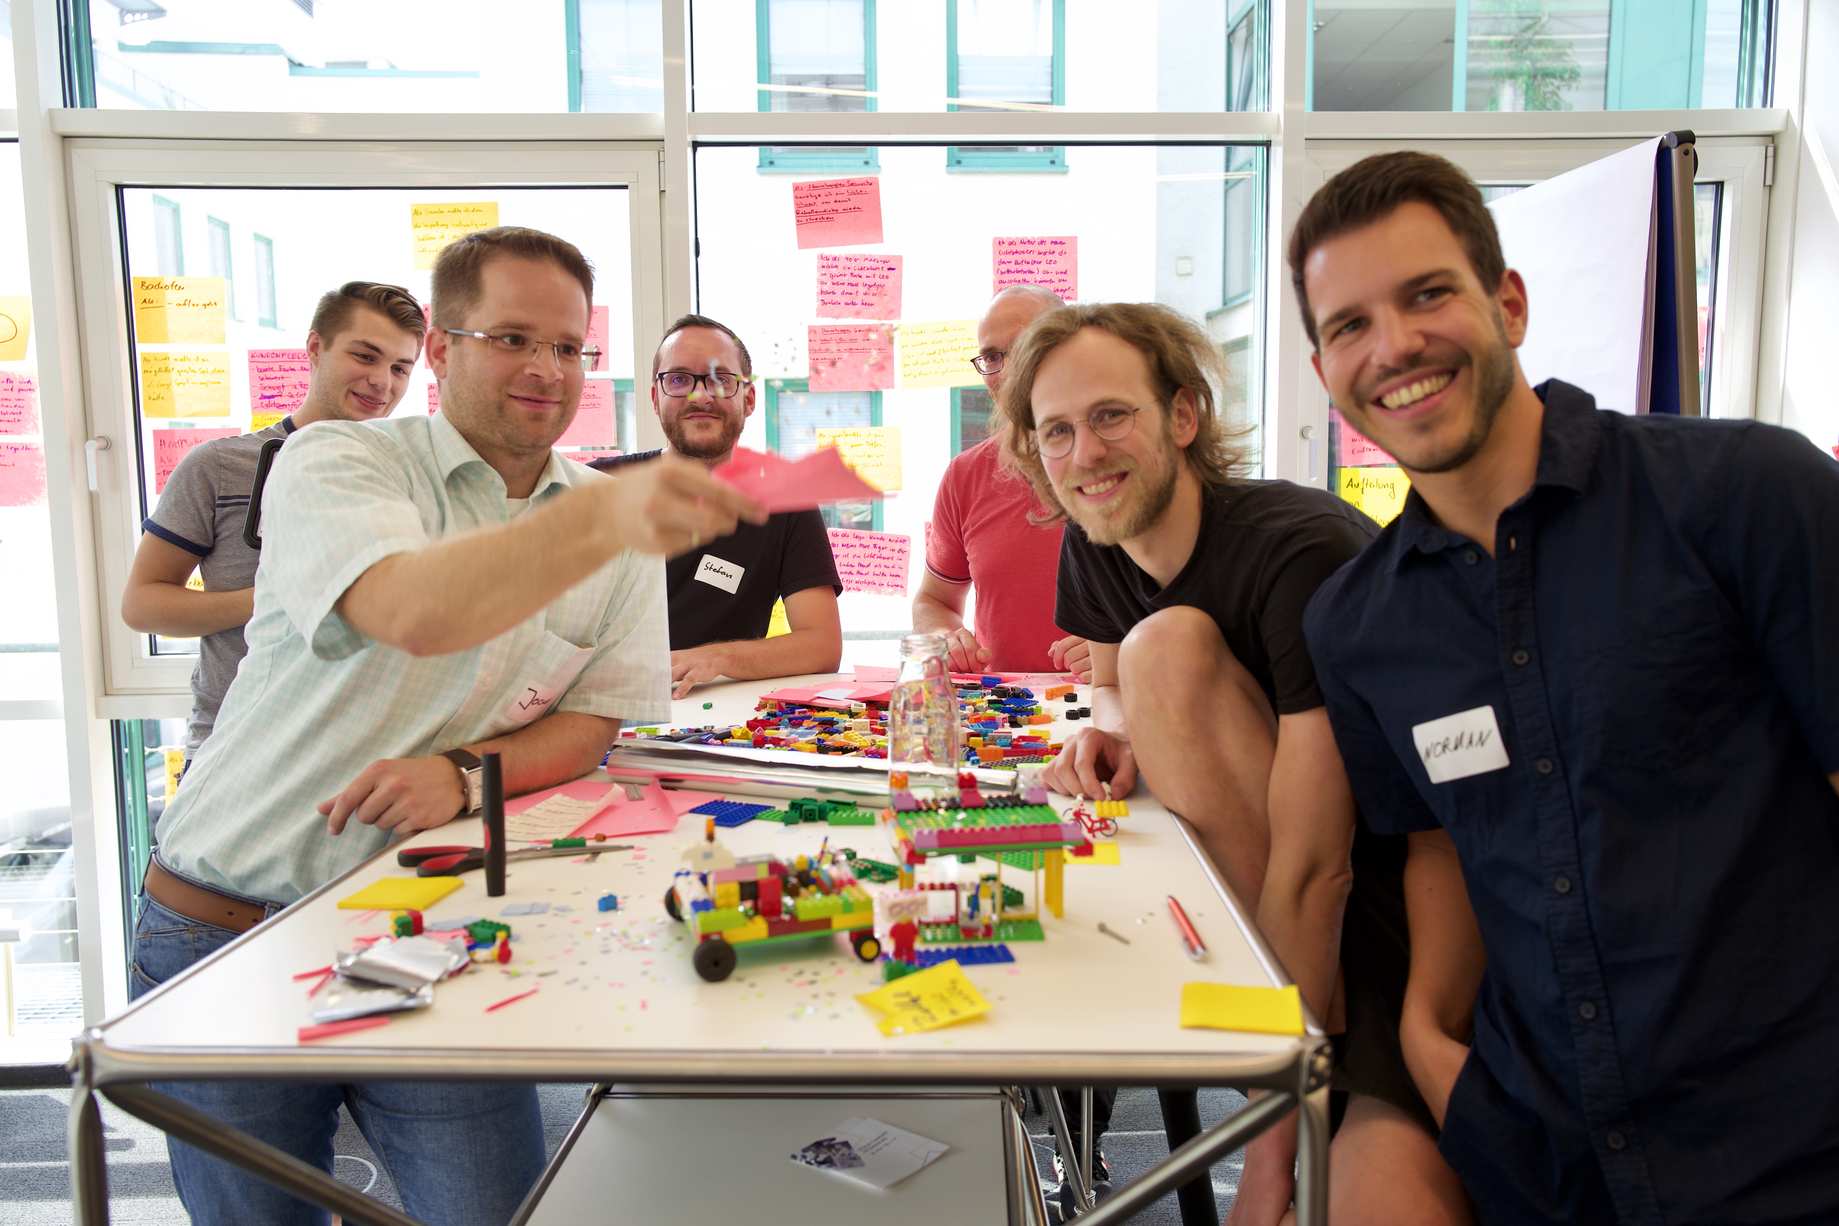 A Scrum Master team at the table, with a Lego building, ready for review